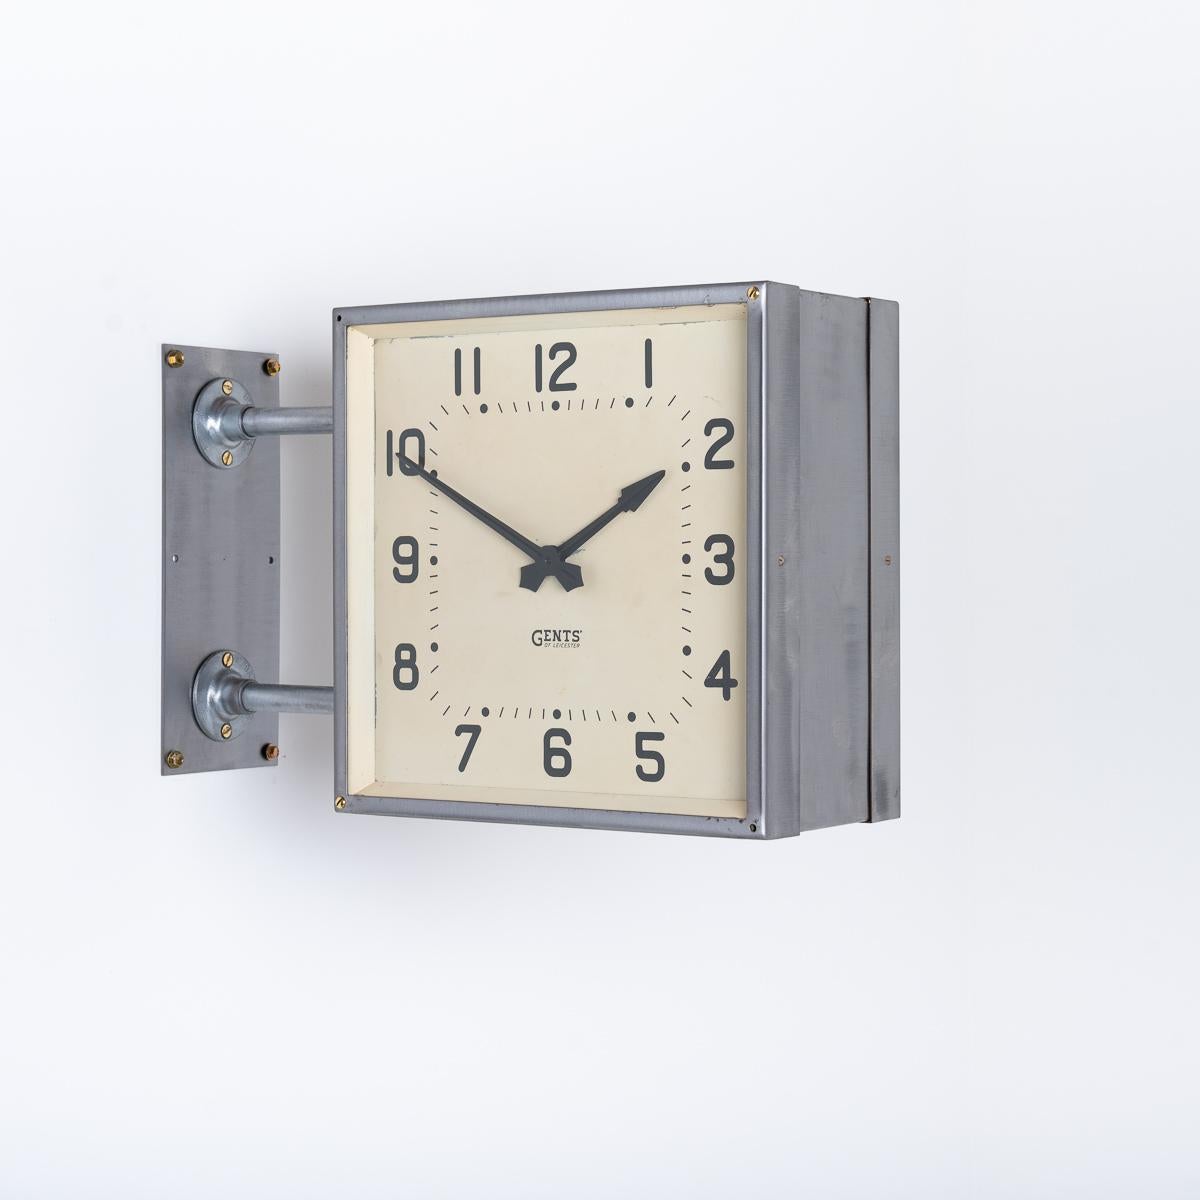 DOUBLE SIDED SQUARE WALL CLOCK BY GENTS OF LEICESTER

A rare form and size clock by British clock makers Gents of Leicester.

Manufactured circa 1940

The clocks steel case has been exposed and left in a RAW brushed finish and protected with a